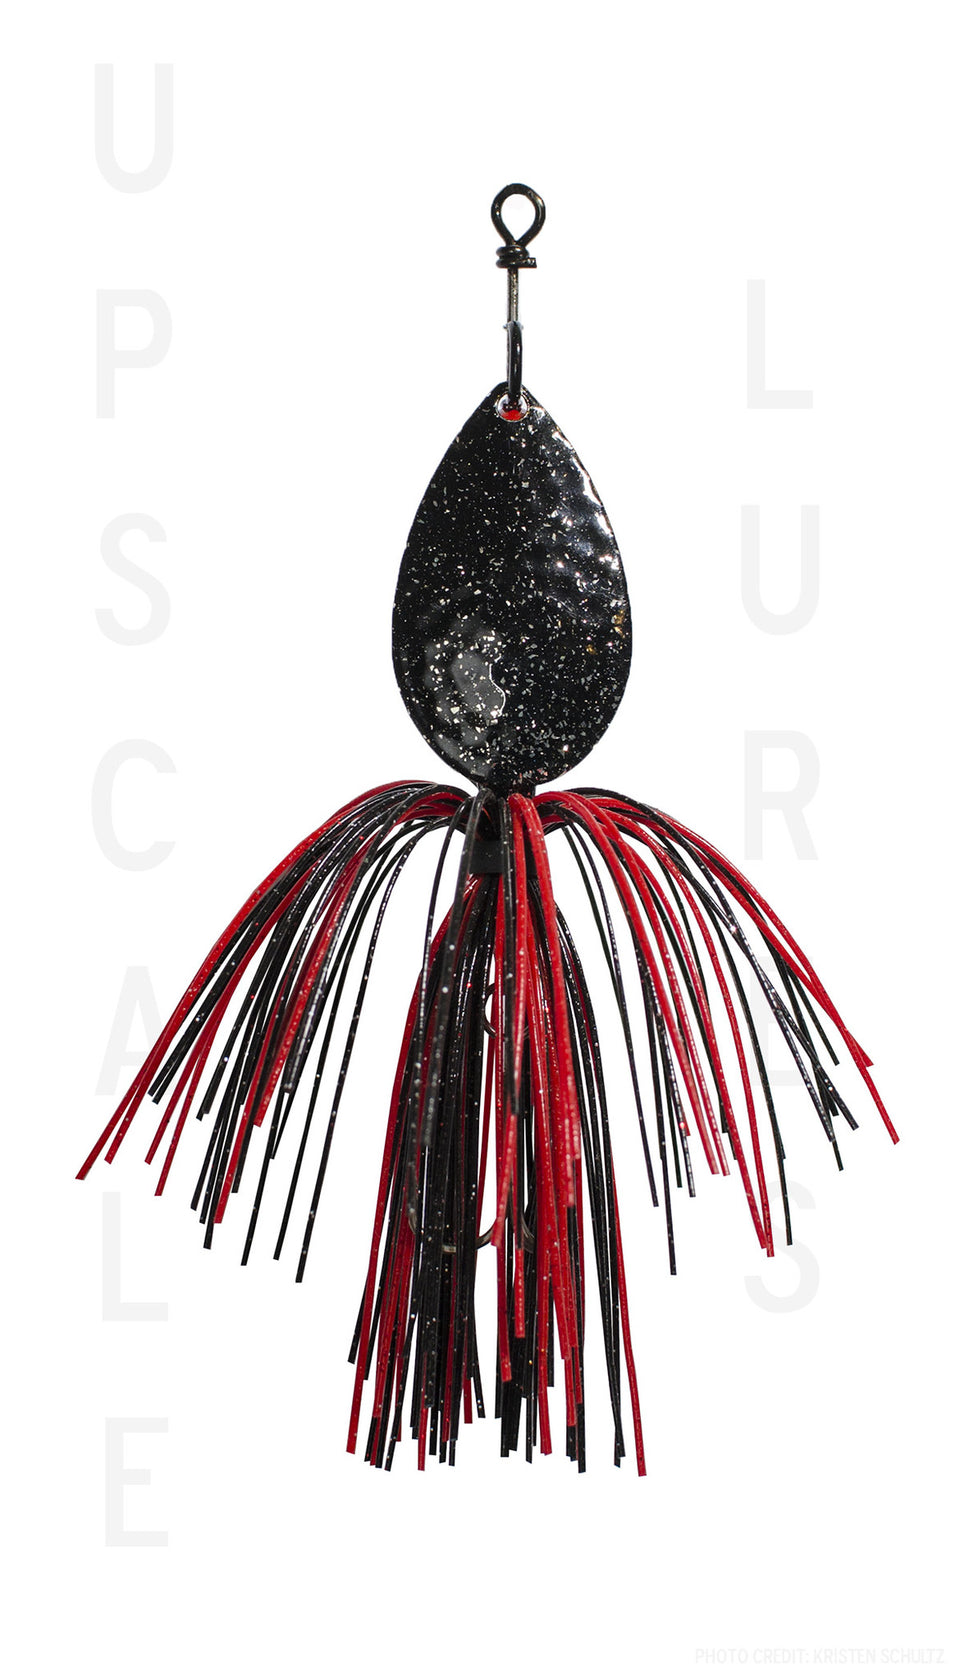 Bignormous Spinner Red/Black 5 inches-3/4oz